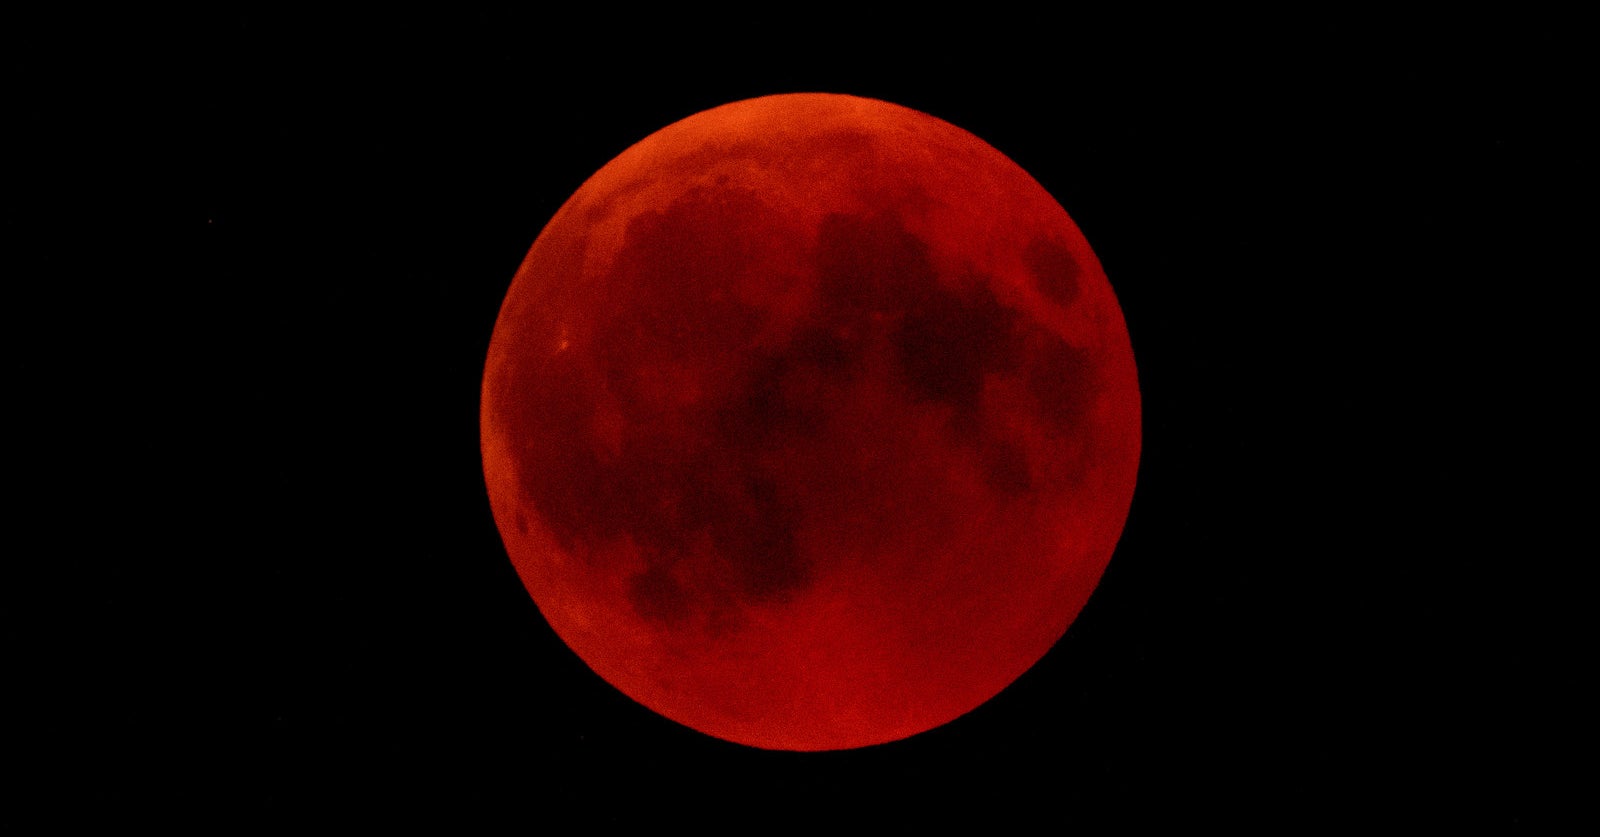 These Stunning Pictures Show The Blood Moon During The Longest Lunar